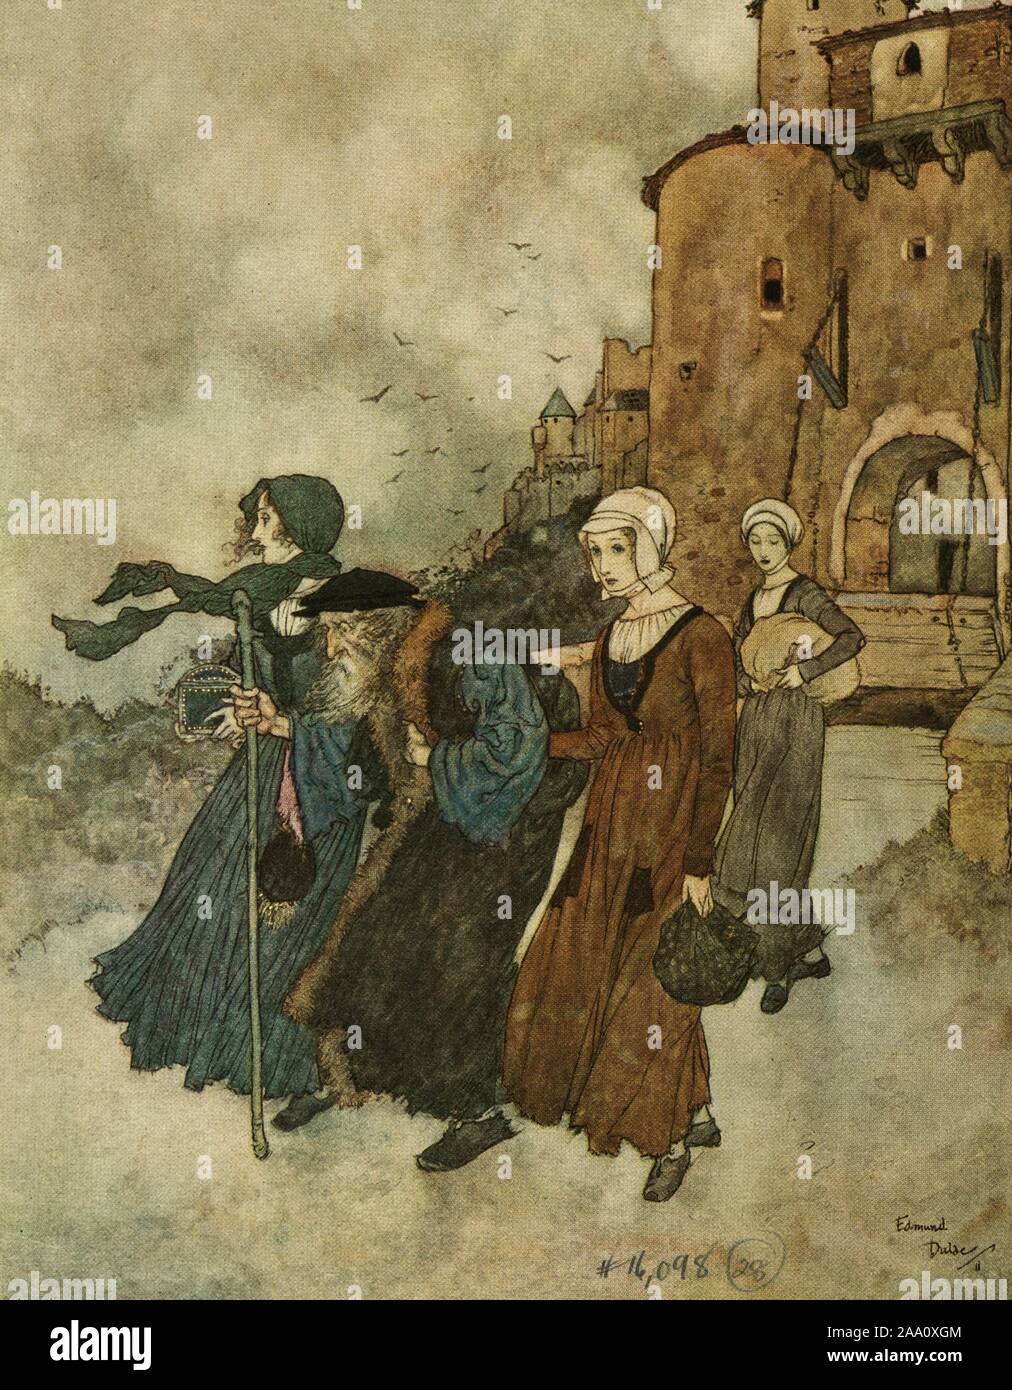 Illustration of the tale 'The Wind's Tale' by Hans Christian Andersen, featuring Waldemar Daa and his daughters leaving their castle, by artist Edmund Dulac, from the book published by Hodder and Stoughton, 1911. From the New York Public Library. () Stock Photo